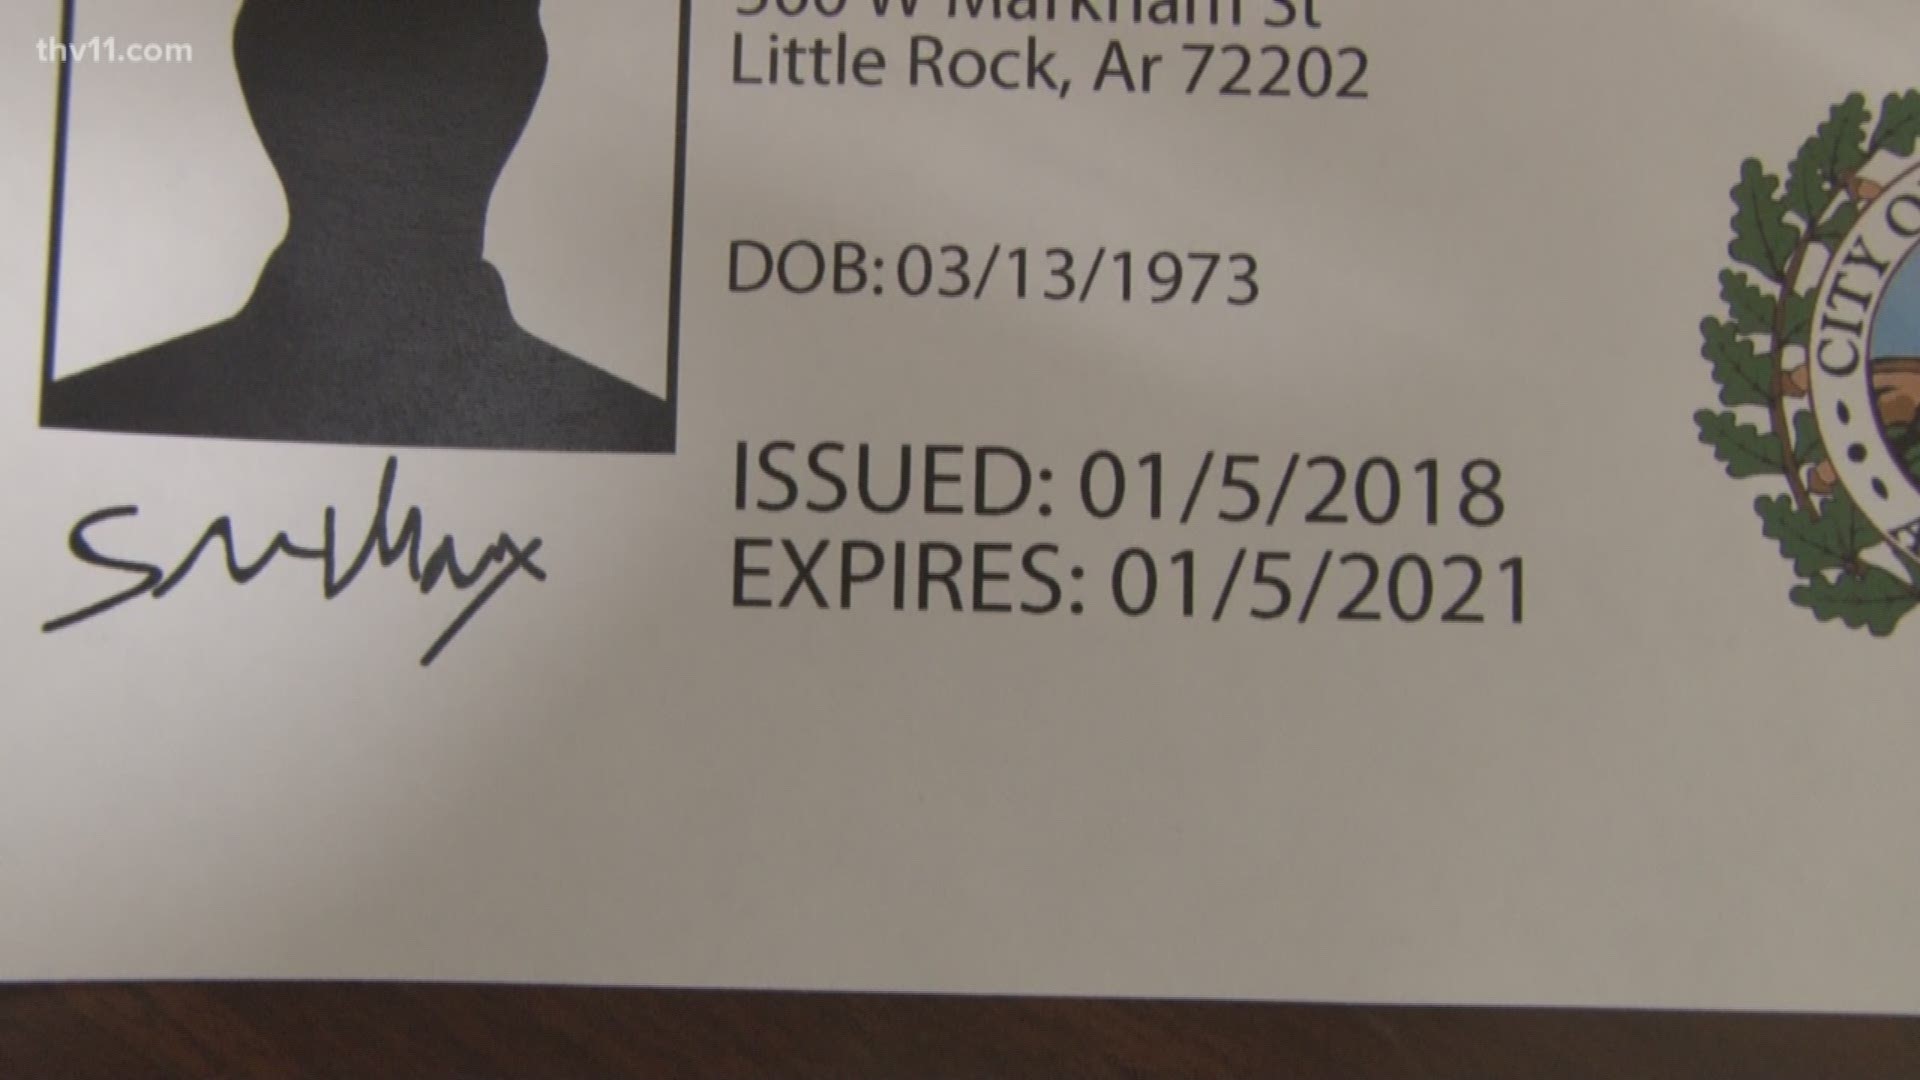 Little Rock to issue its own ID cards